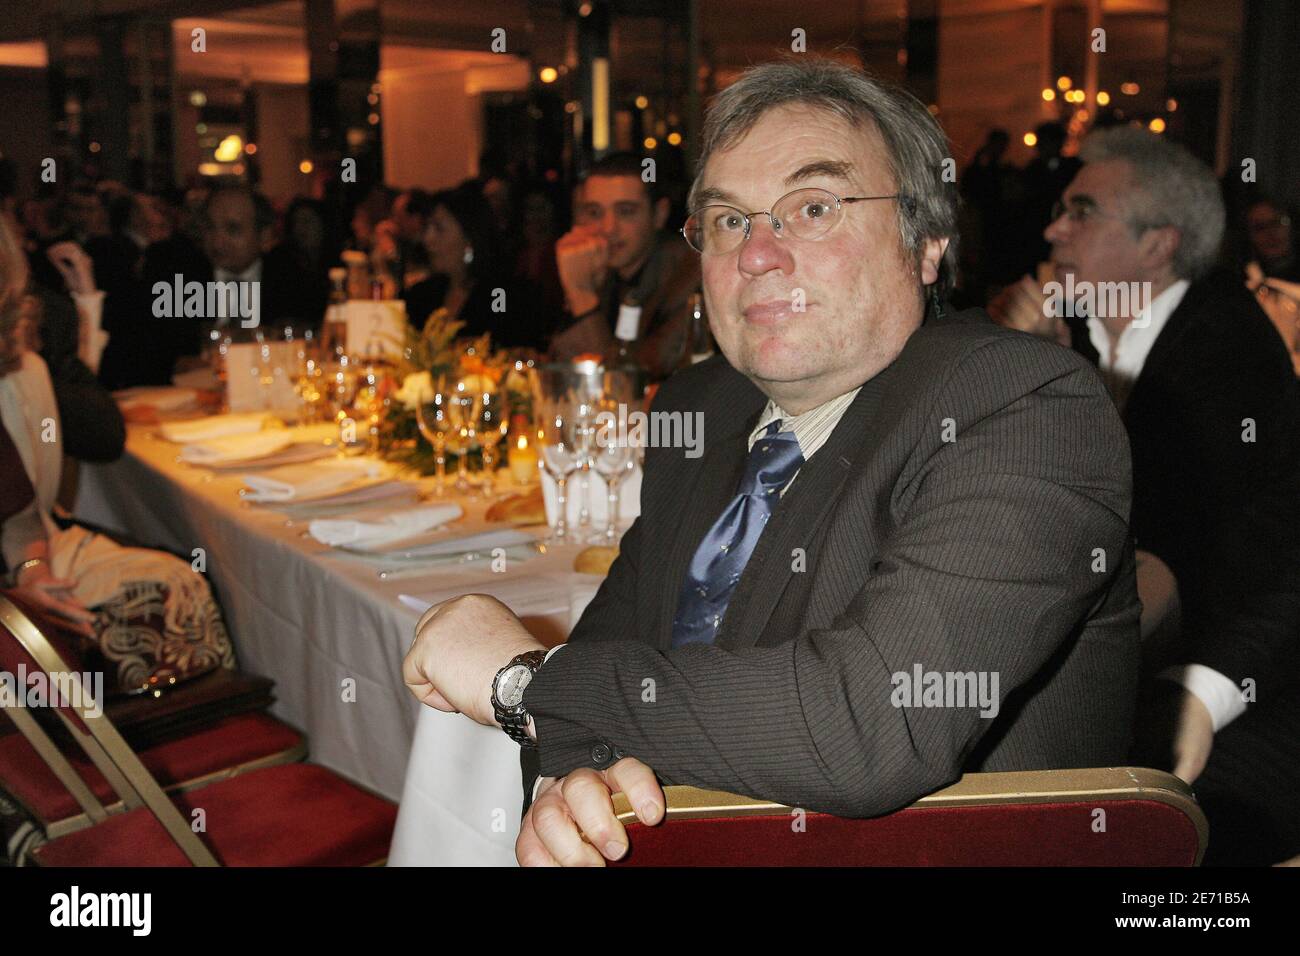 French philosoph Robert Redeker attends the CRIF Annual dinner, held at the Pavillon d'Armenonville in Paris, France, on January 23, 2007. Photo by Thierry Orban/ABACAPRESS.COM Stock Photo